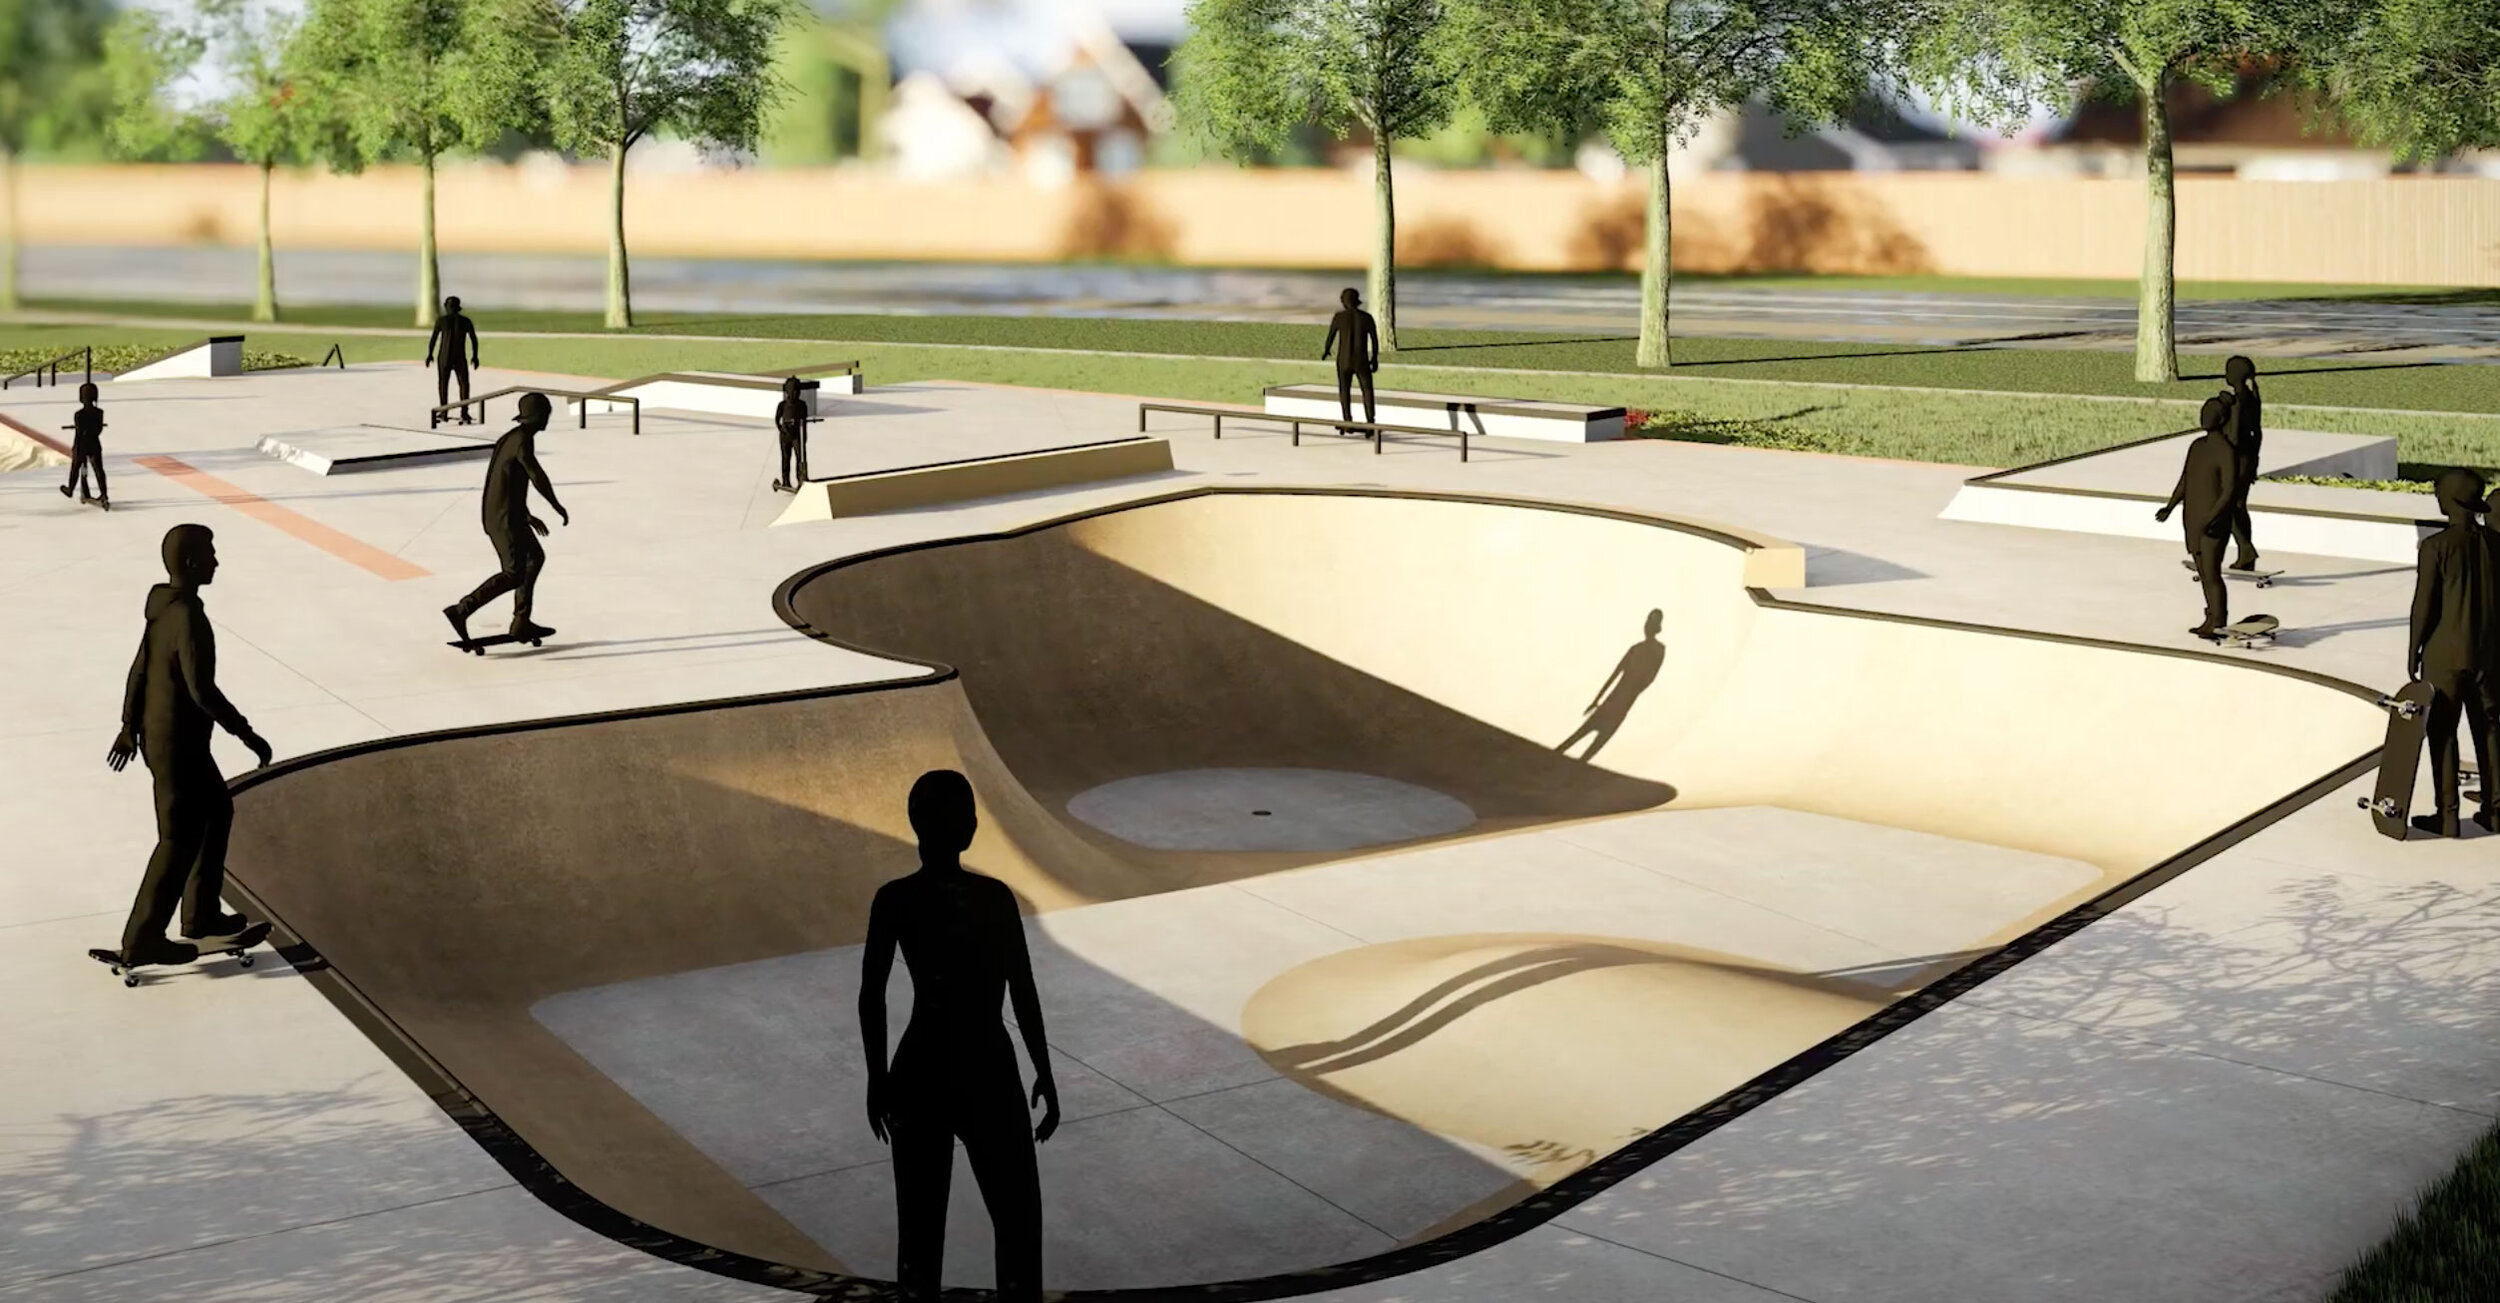 Newmarket's First Outdoor Skate Park: A variety of skate features to accommodate junior to advanced riders and provide learning opportunities to all users and age groups.